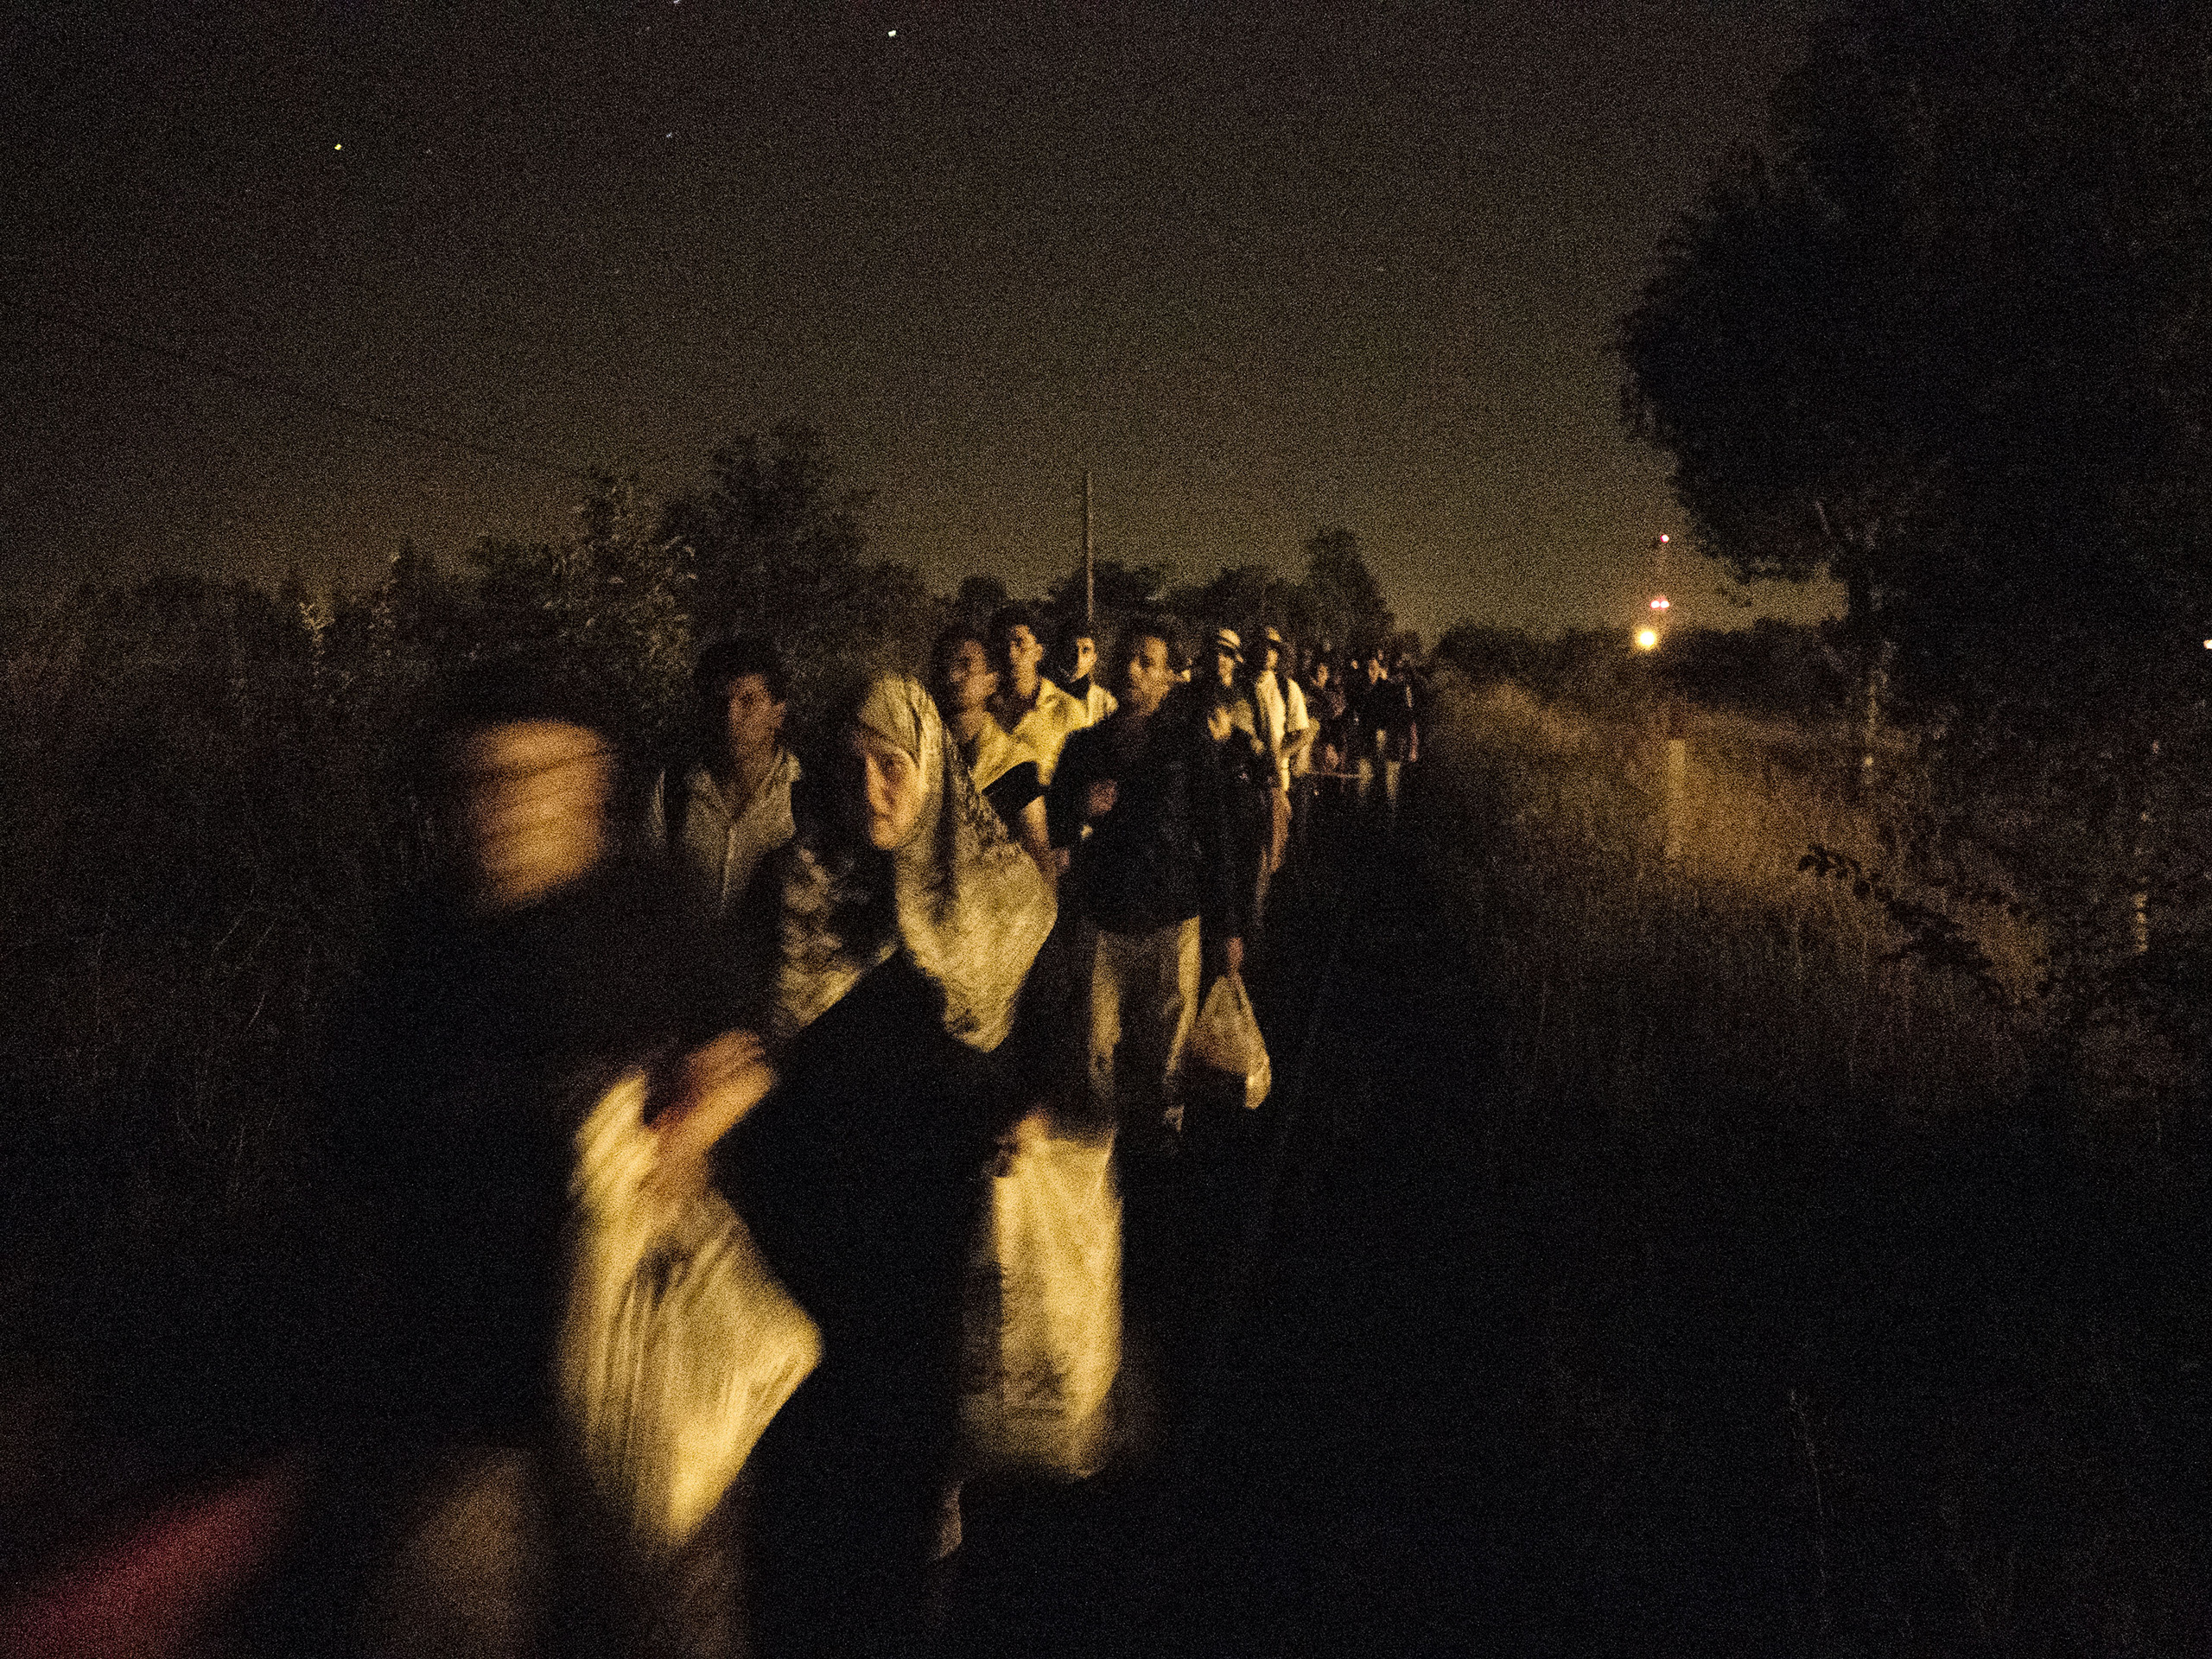 Horgos, Serbia. August 12, 2015. Syrian families walk at night toward the border to attempt to cross it.